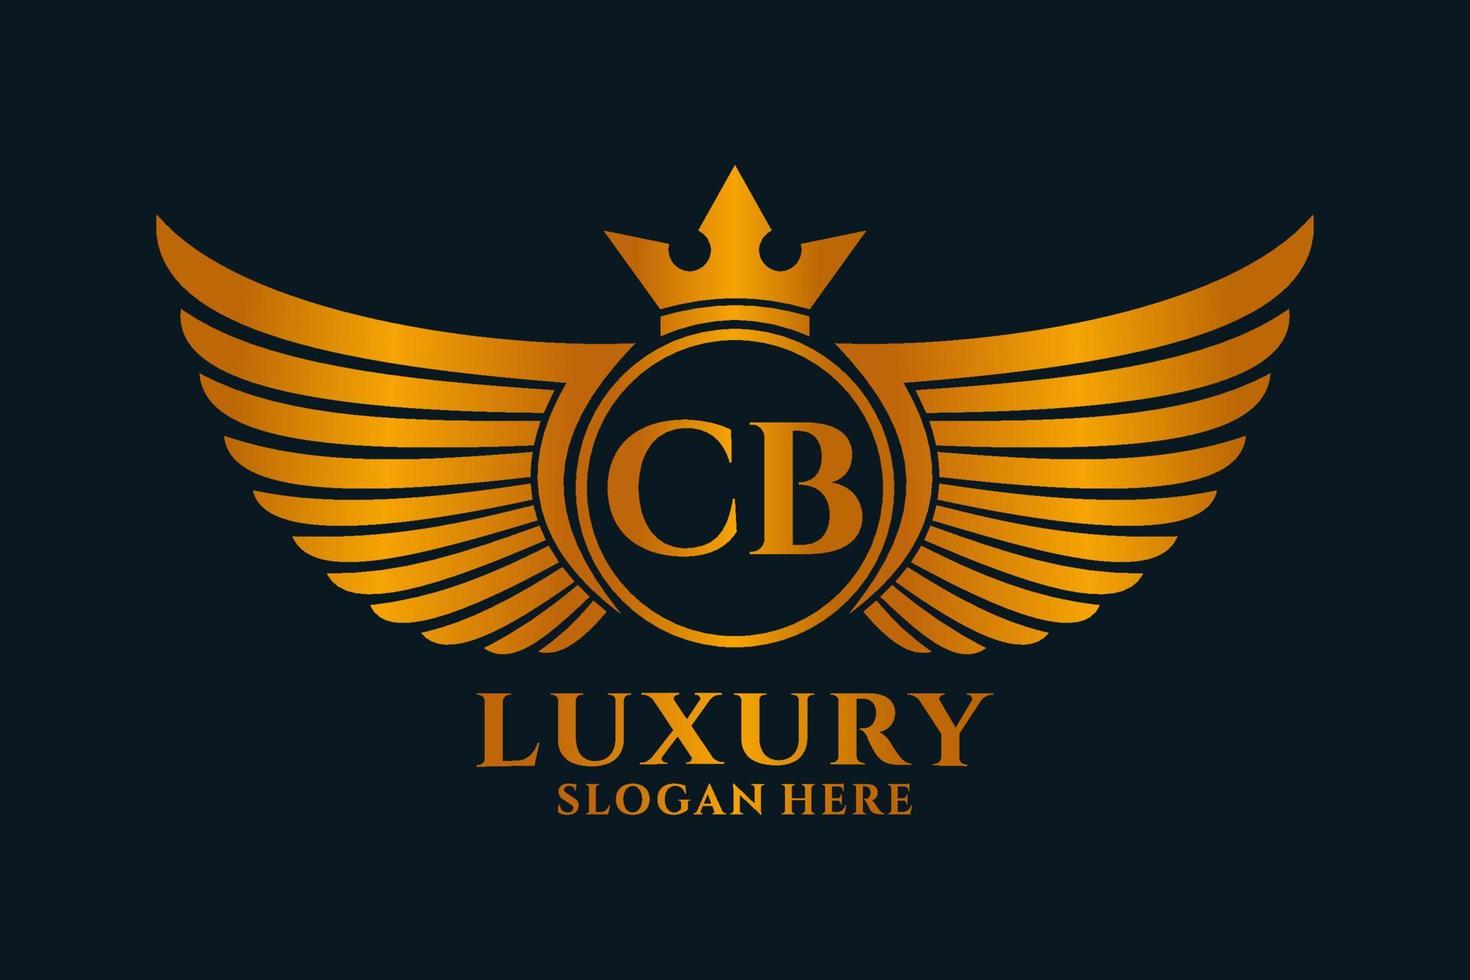 Luxury royal wing Letter CB crest Gold color Logo vector, Victory logo, crest logo, wing logo, vector logo template.